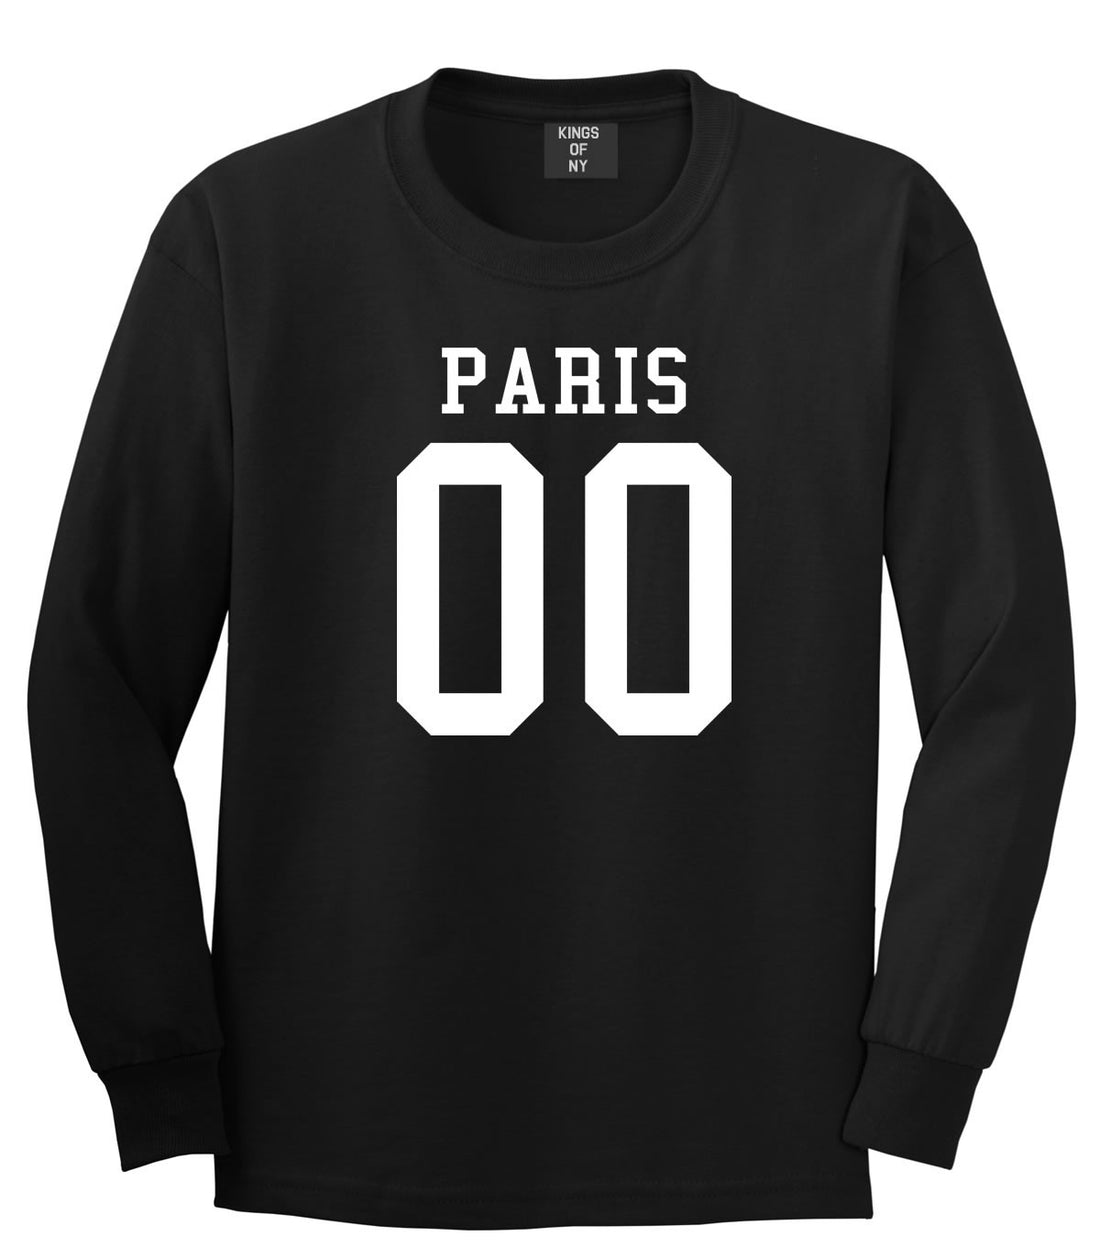 Paris Team 00 Jersey Long Sleeve T-Shirt in Black By Kings Of NY